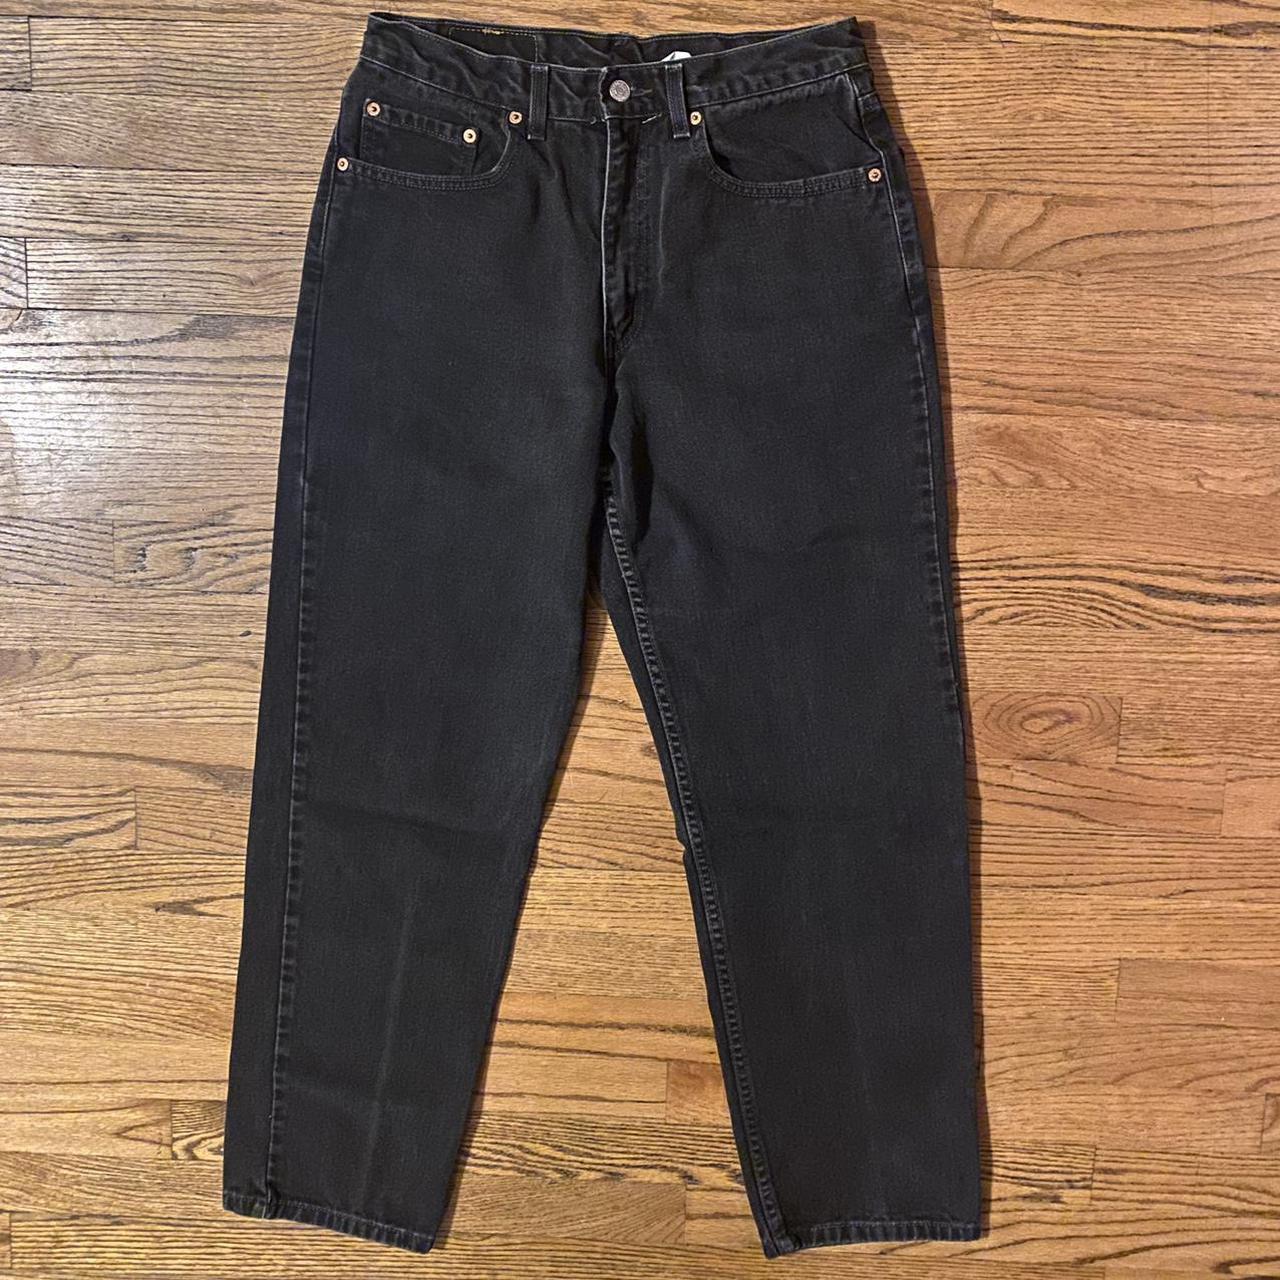 Product Image 1 - Vintage Levi’s 550 relaxed fit